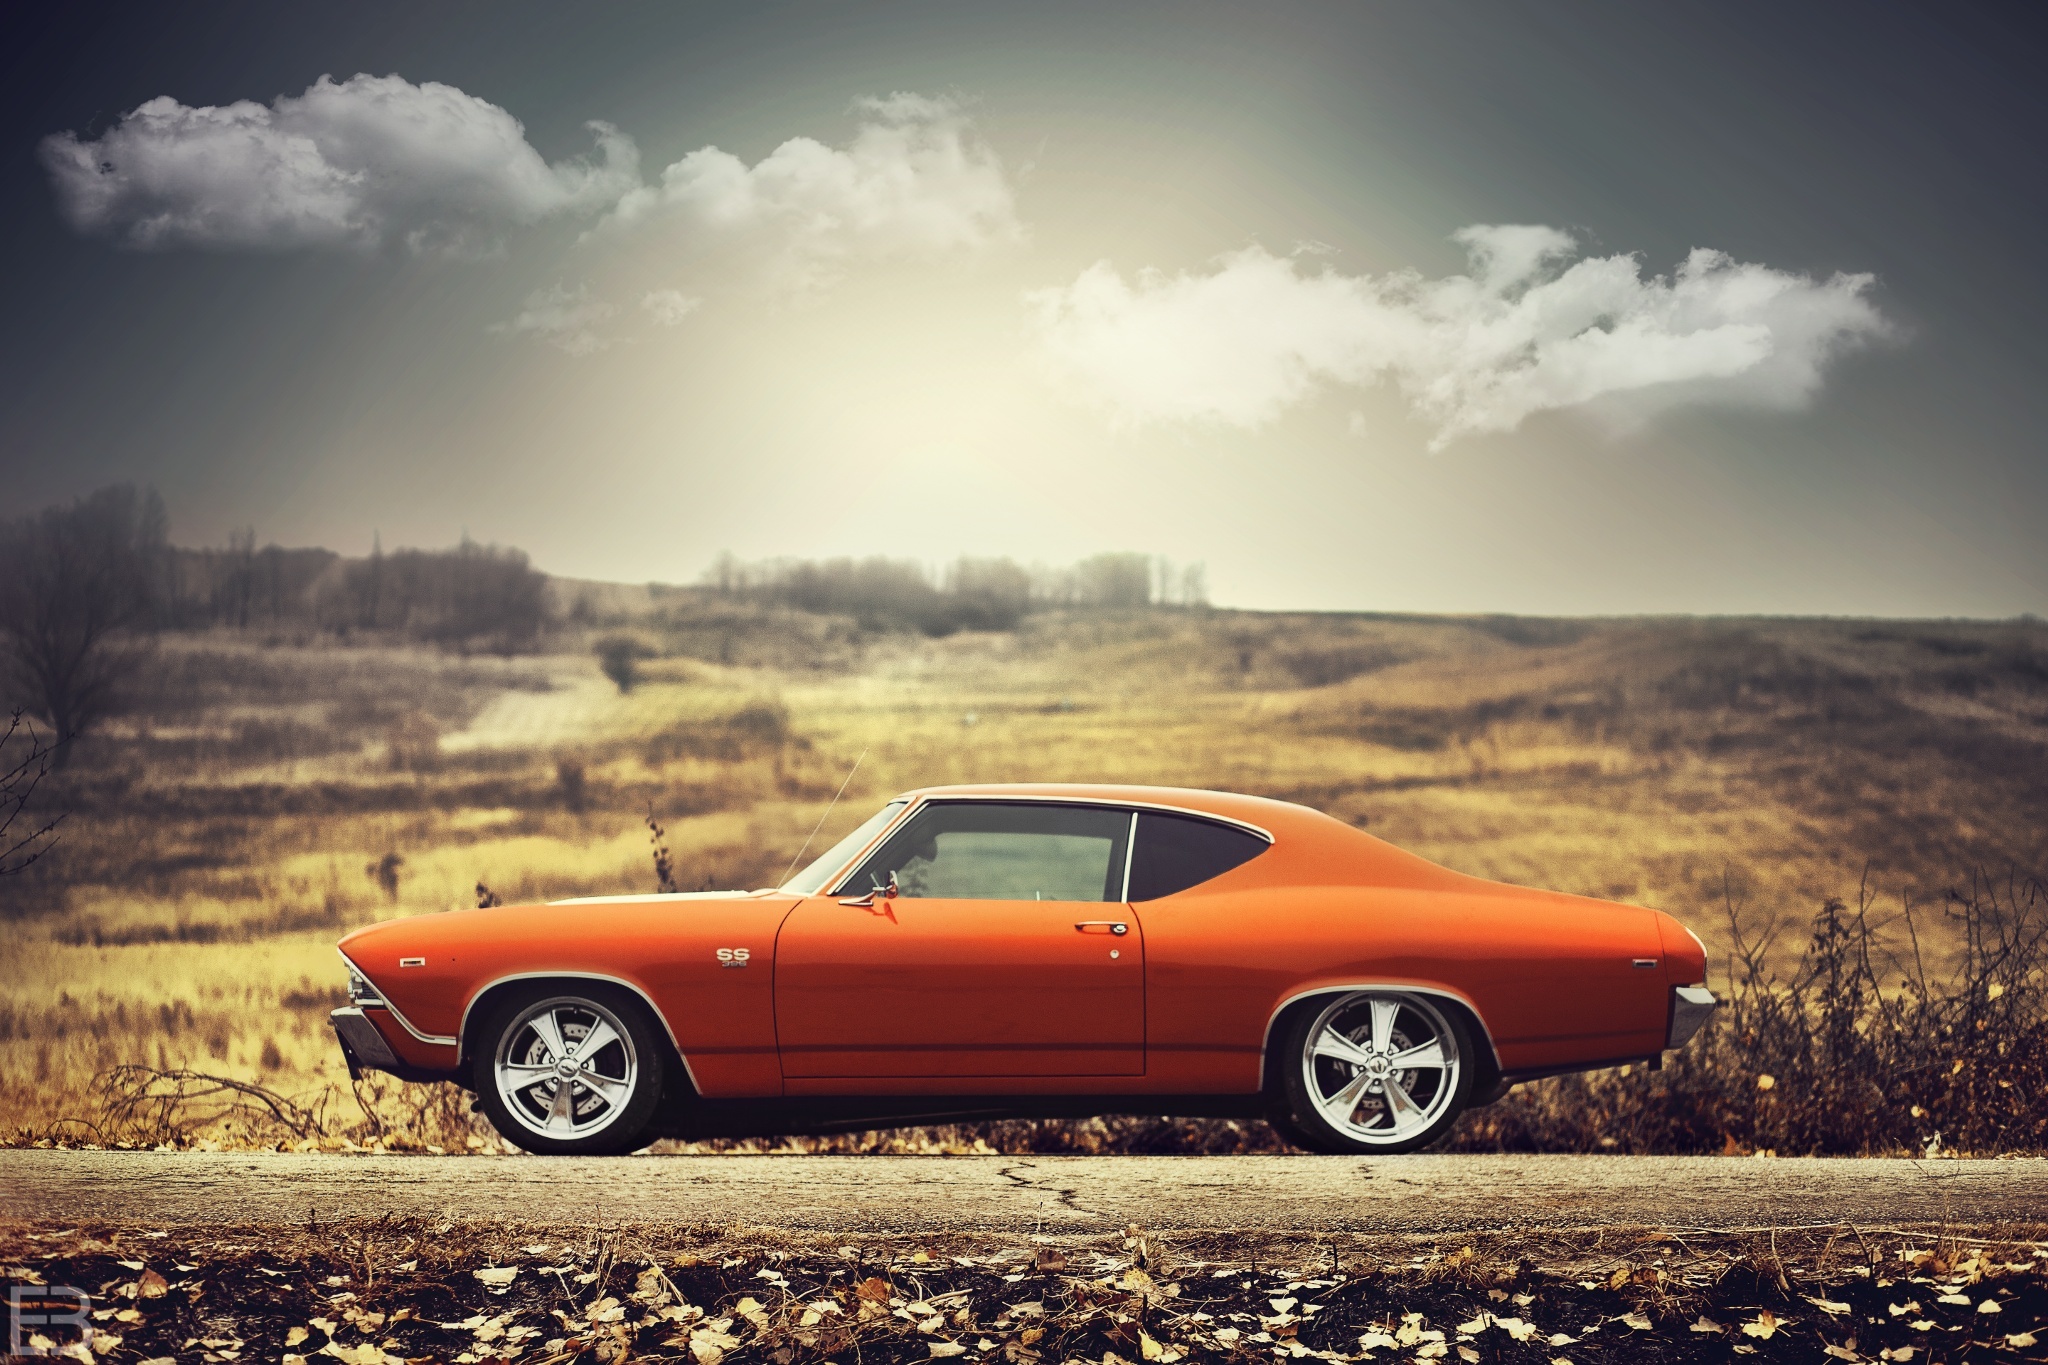 muscle car, vehicles, chevrolet chevelle ss, chevrolet chevelle, chevrolet, orange car mobile wallpaper